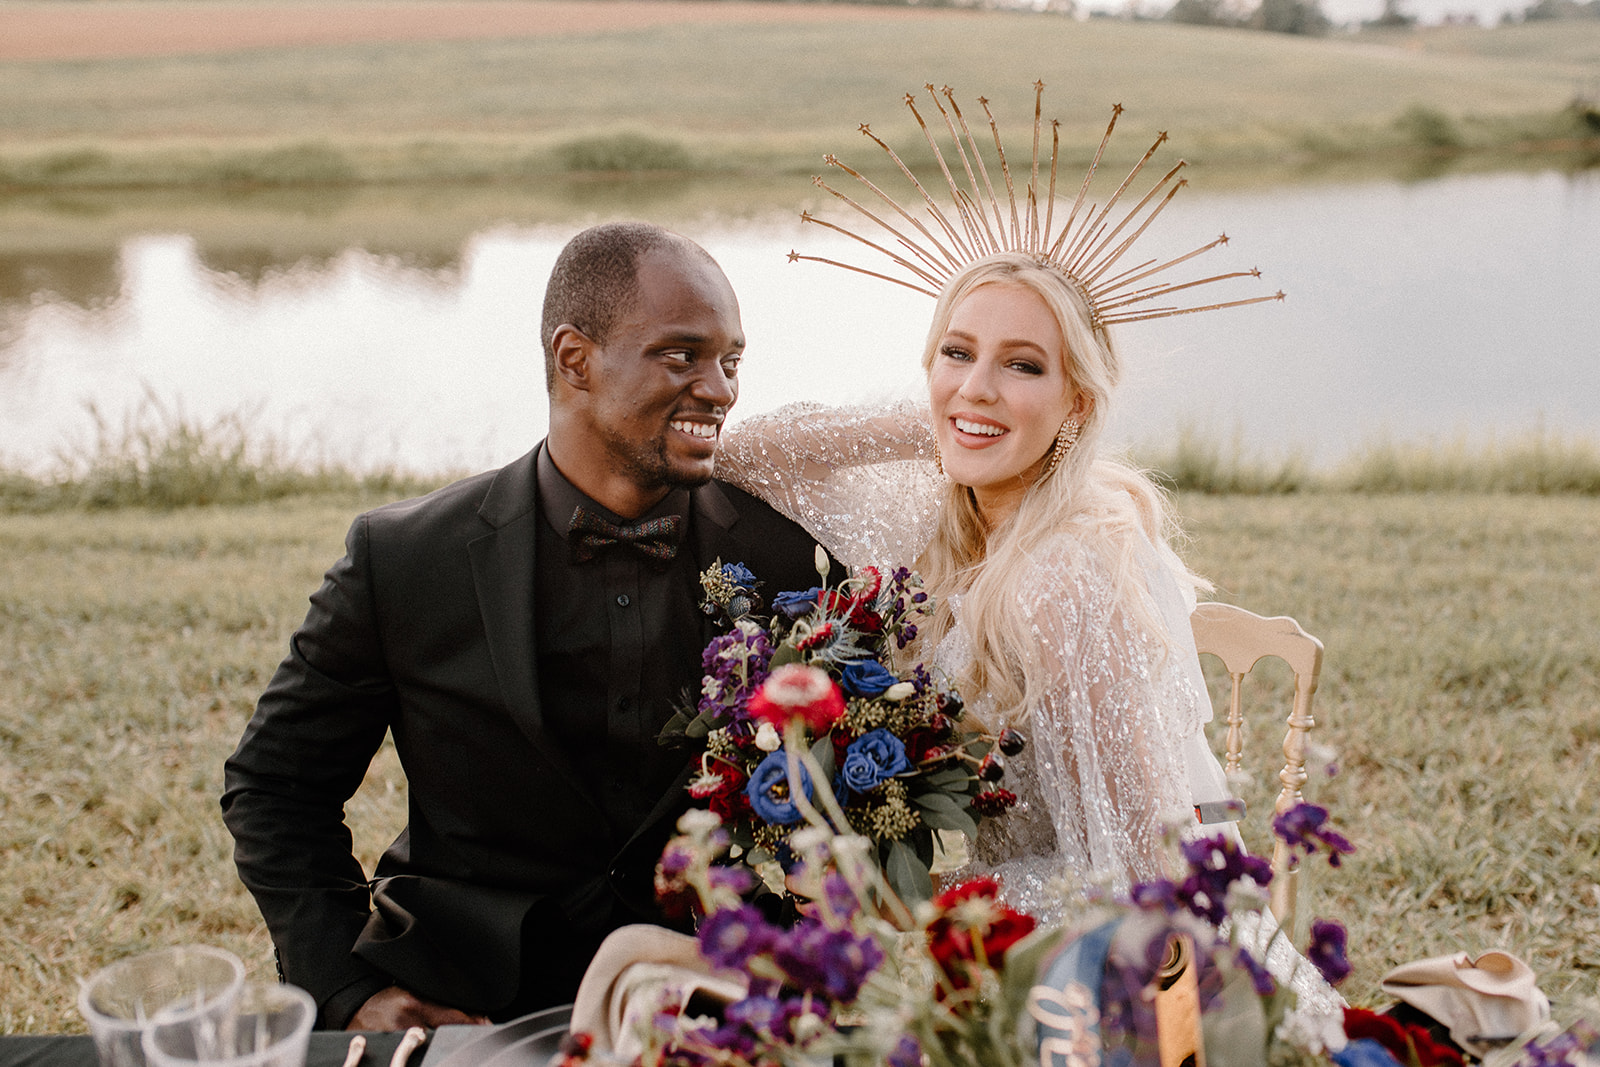 Fall Celestial Styled Shoot by Jayde J. Smith Events